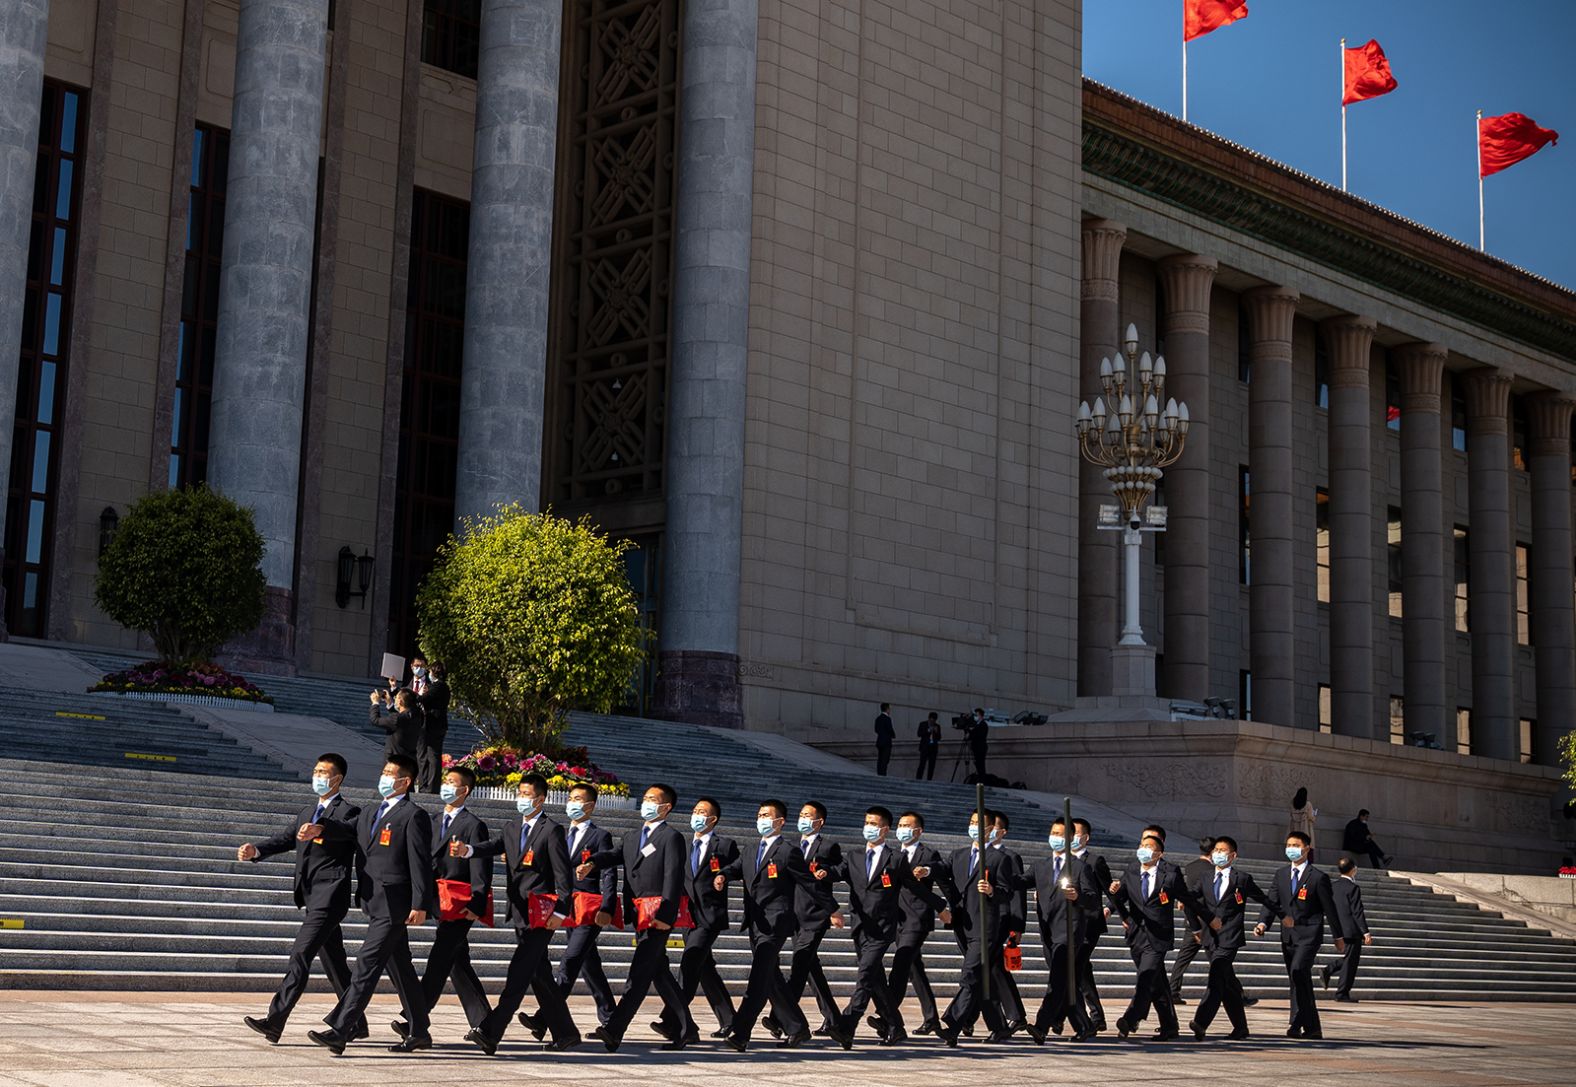 Security guards in front of the Great Hall of the People in Beijing at the end of the closing ceremony.